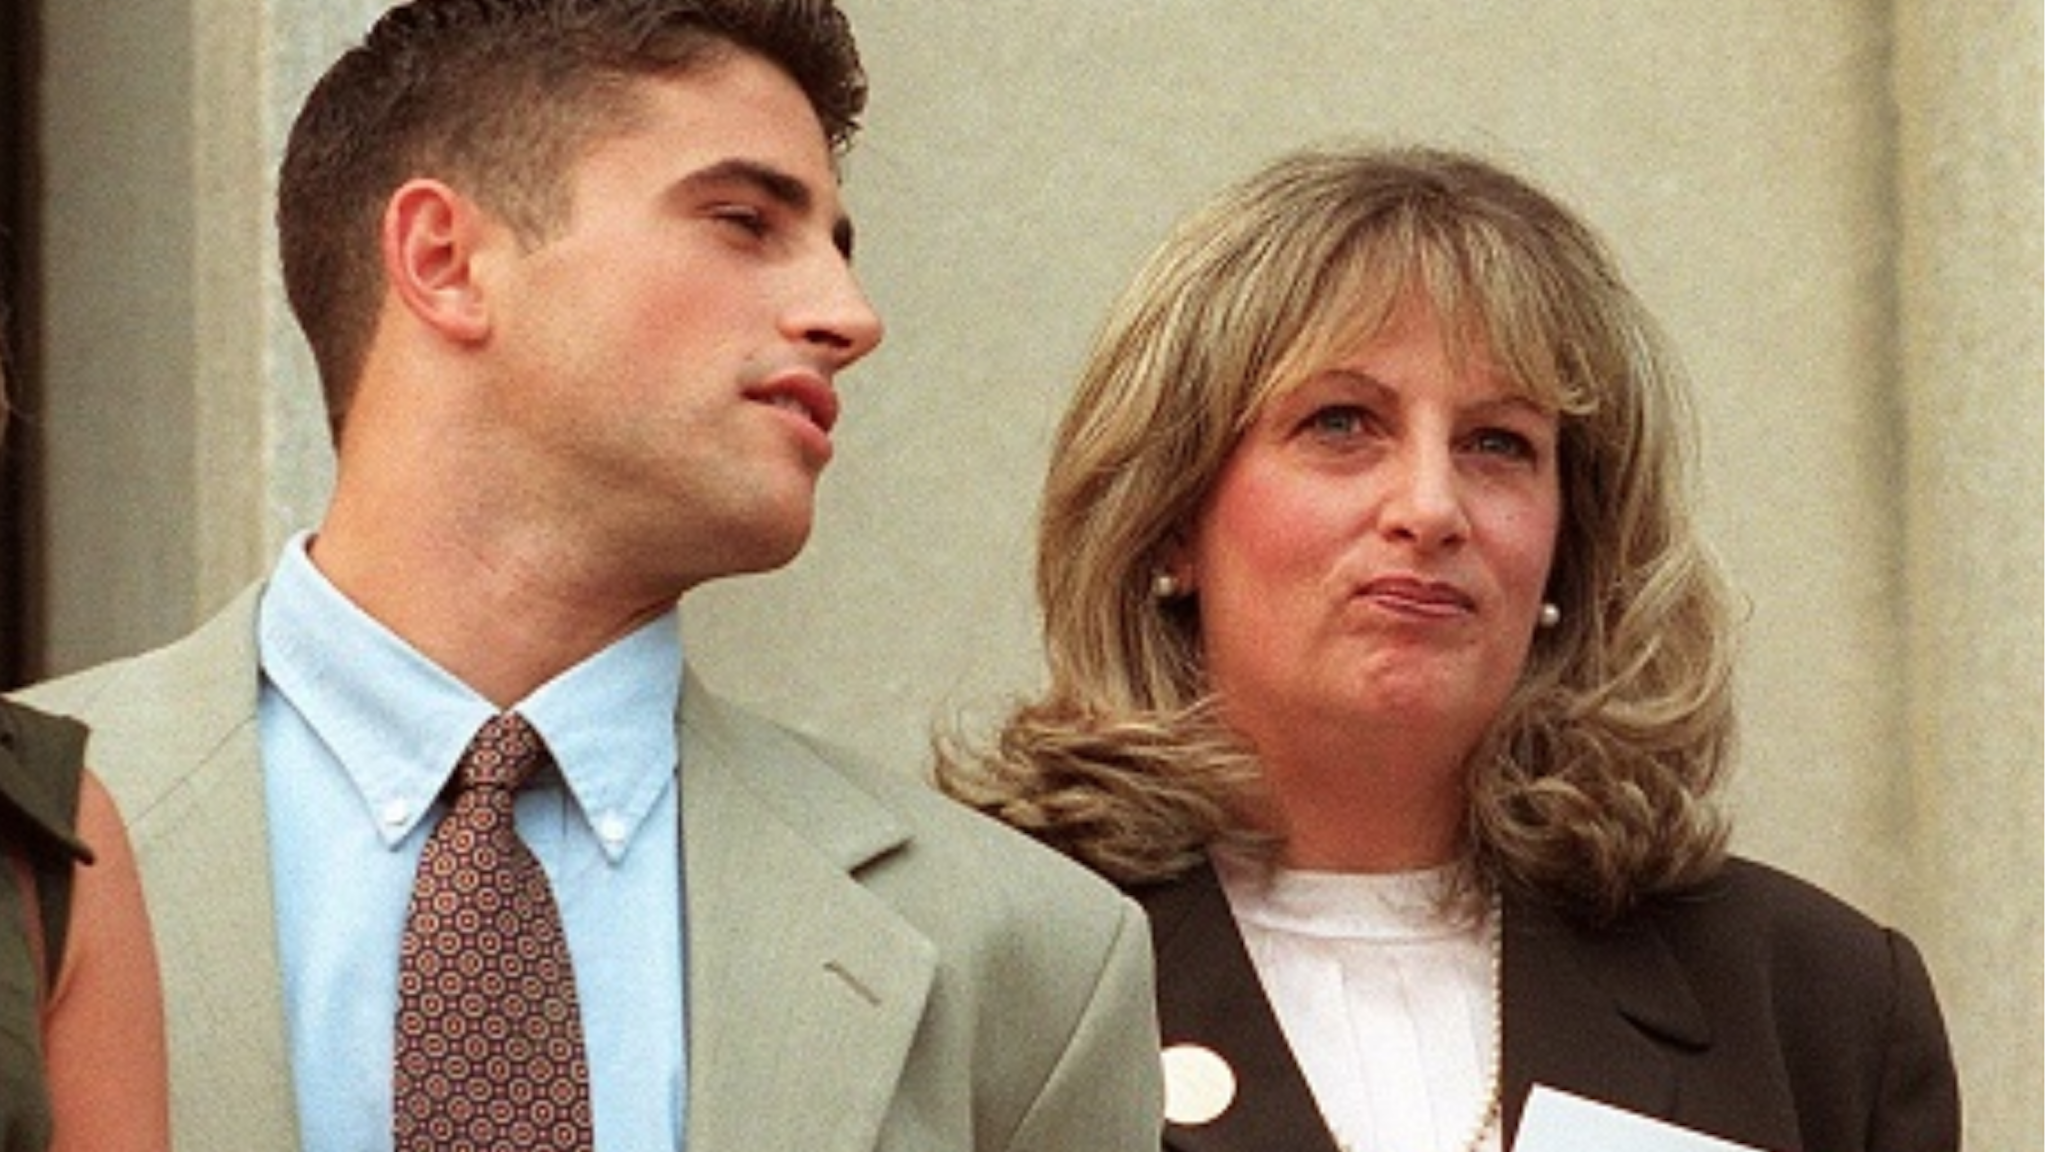 WASHINGTON, DC - JULY 29: Linda Tripp (R) waits to make a statement to reporters beside her daughter Allison (L) and son Ryan (C) in front of the Federal Courthouse 29 July in Washington, DC, after her eighth and final day of testimony before a federal grand jury. Tripp's taped conversations with former White House intern Monica Lewinsky triggered the sex-and-lies probe dogging US President Bill Clinton.